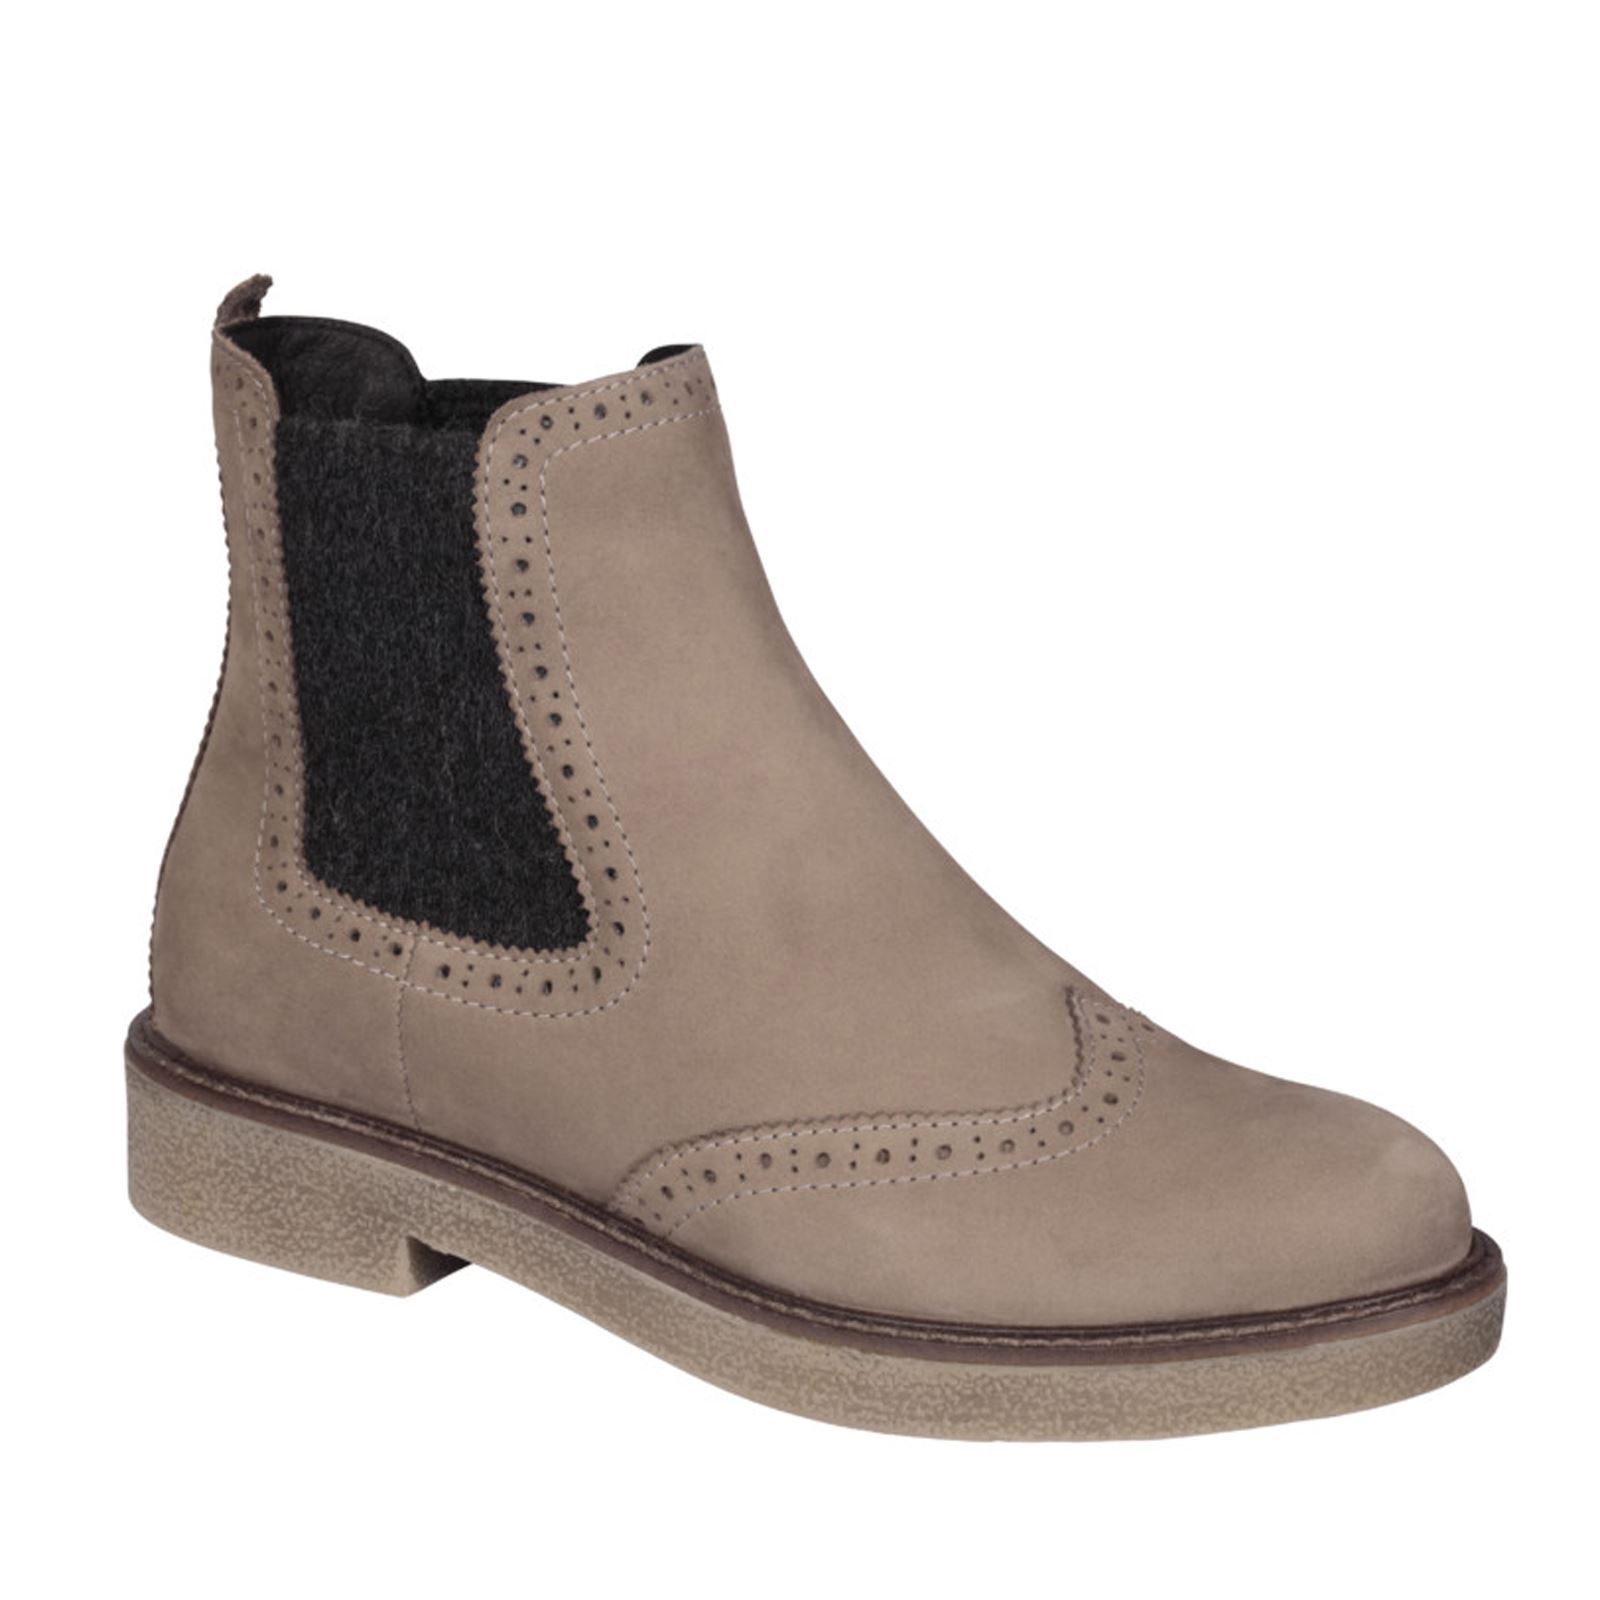 ZAPATO SCHOLL RUDY TAUPE N 39